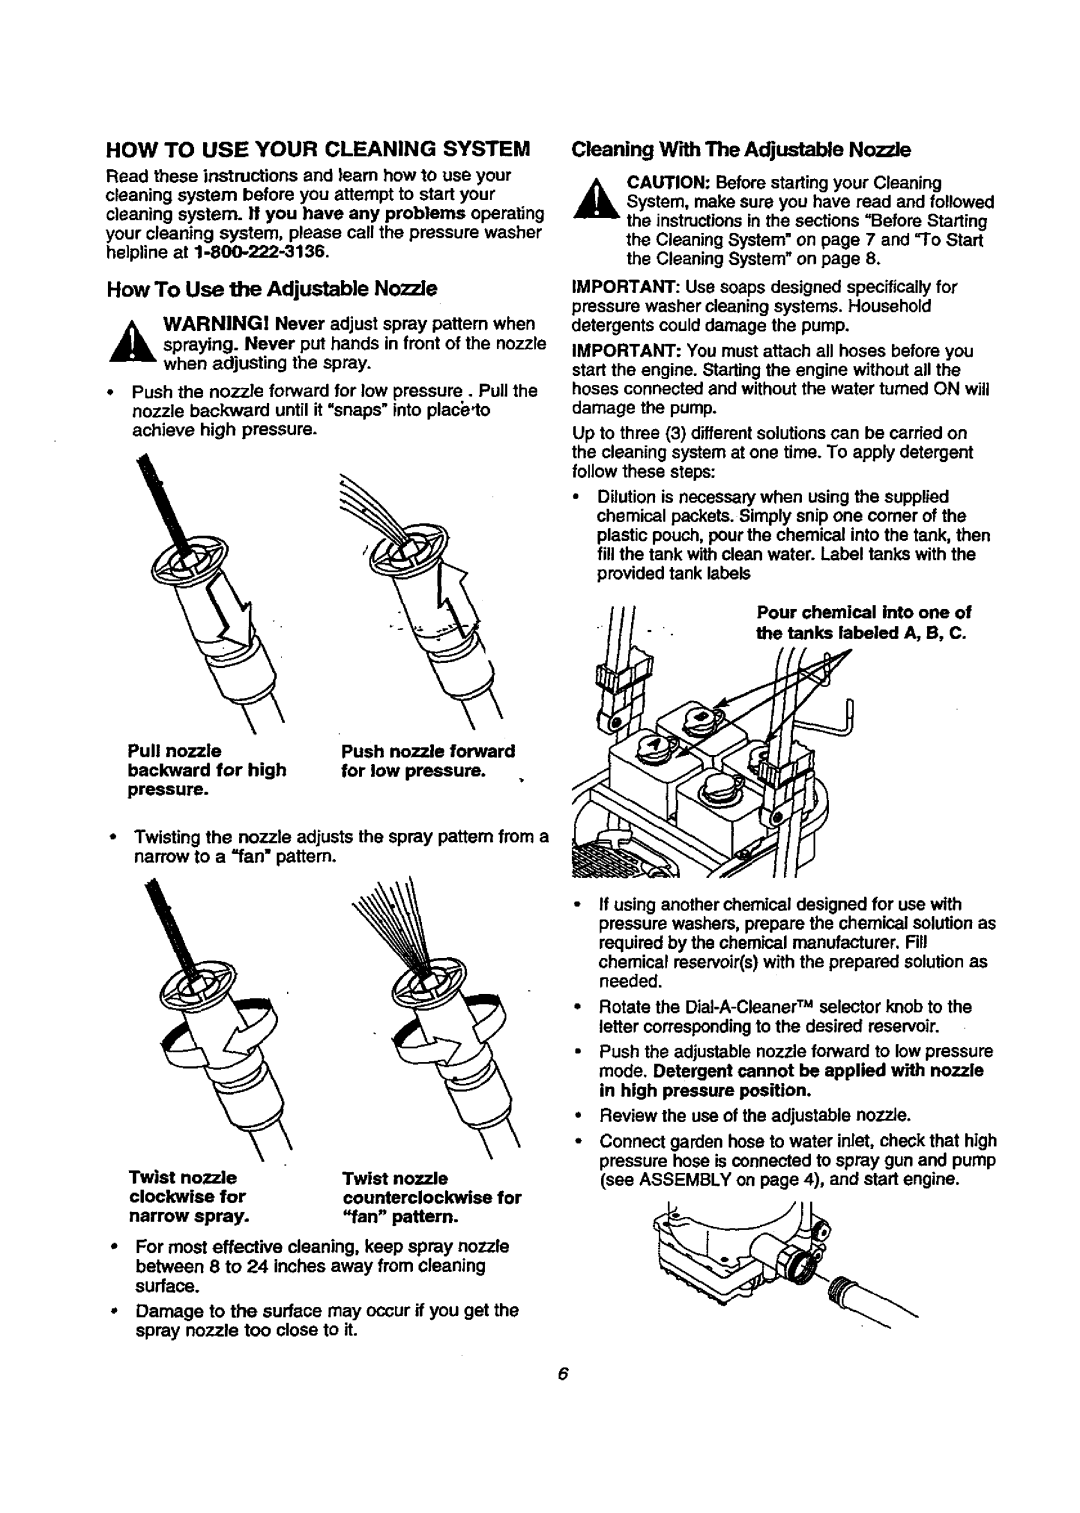 Craftsman 580.768020 manual How To Use Your Cleaning System, How To Use Ute Adjustable Nozzle 